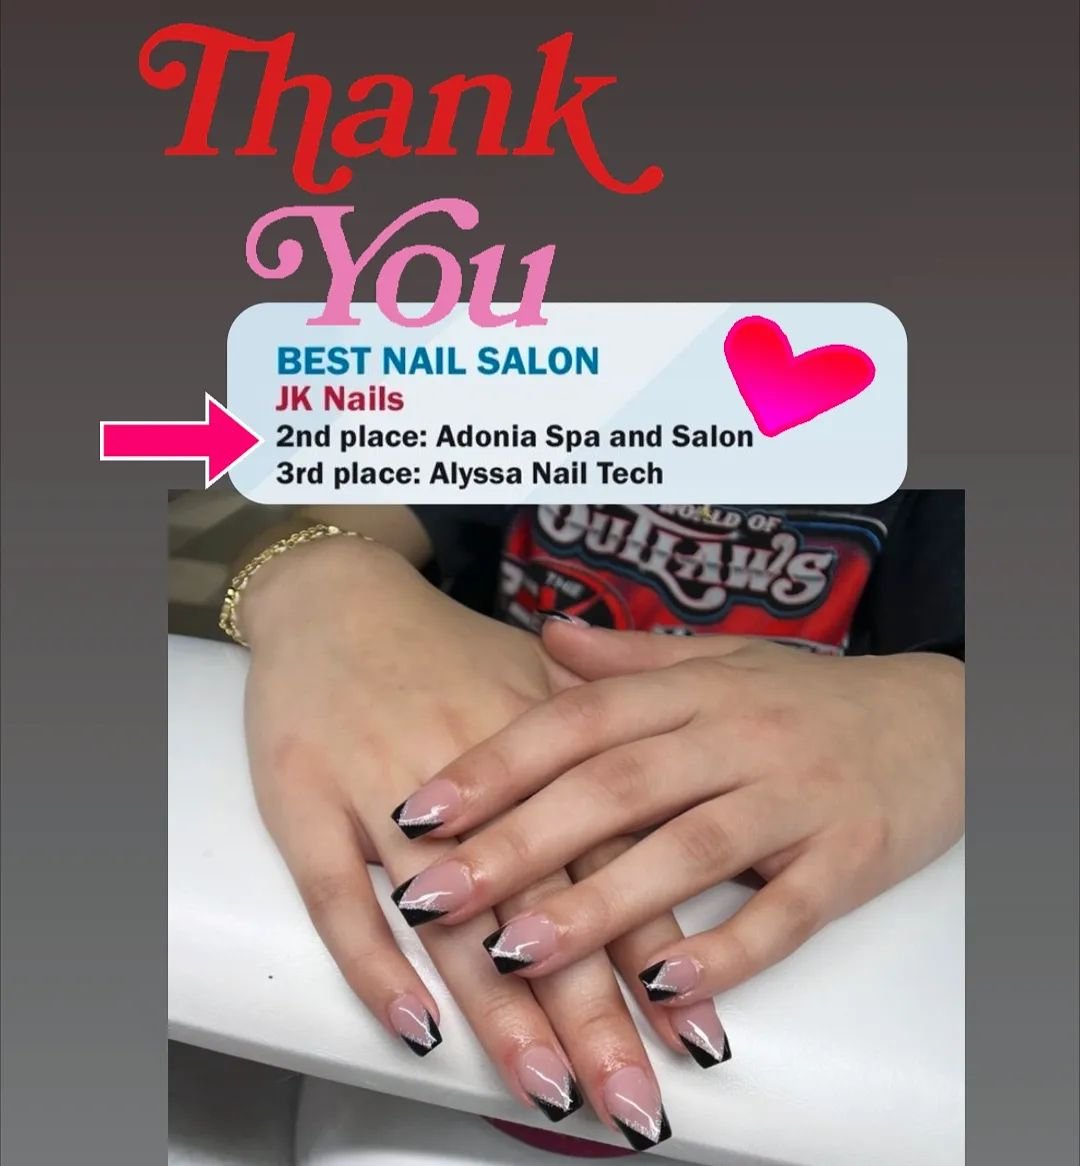 We are SO proud of our girl @getnailed_byangie ranking #2 in the region for nails!!!!
Doing so in her very first year in the business is mind blowing and we are so happy for her!!!
You sure deserve the recognition, Angie 💅 &hearts;️

Your talent, yo